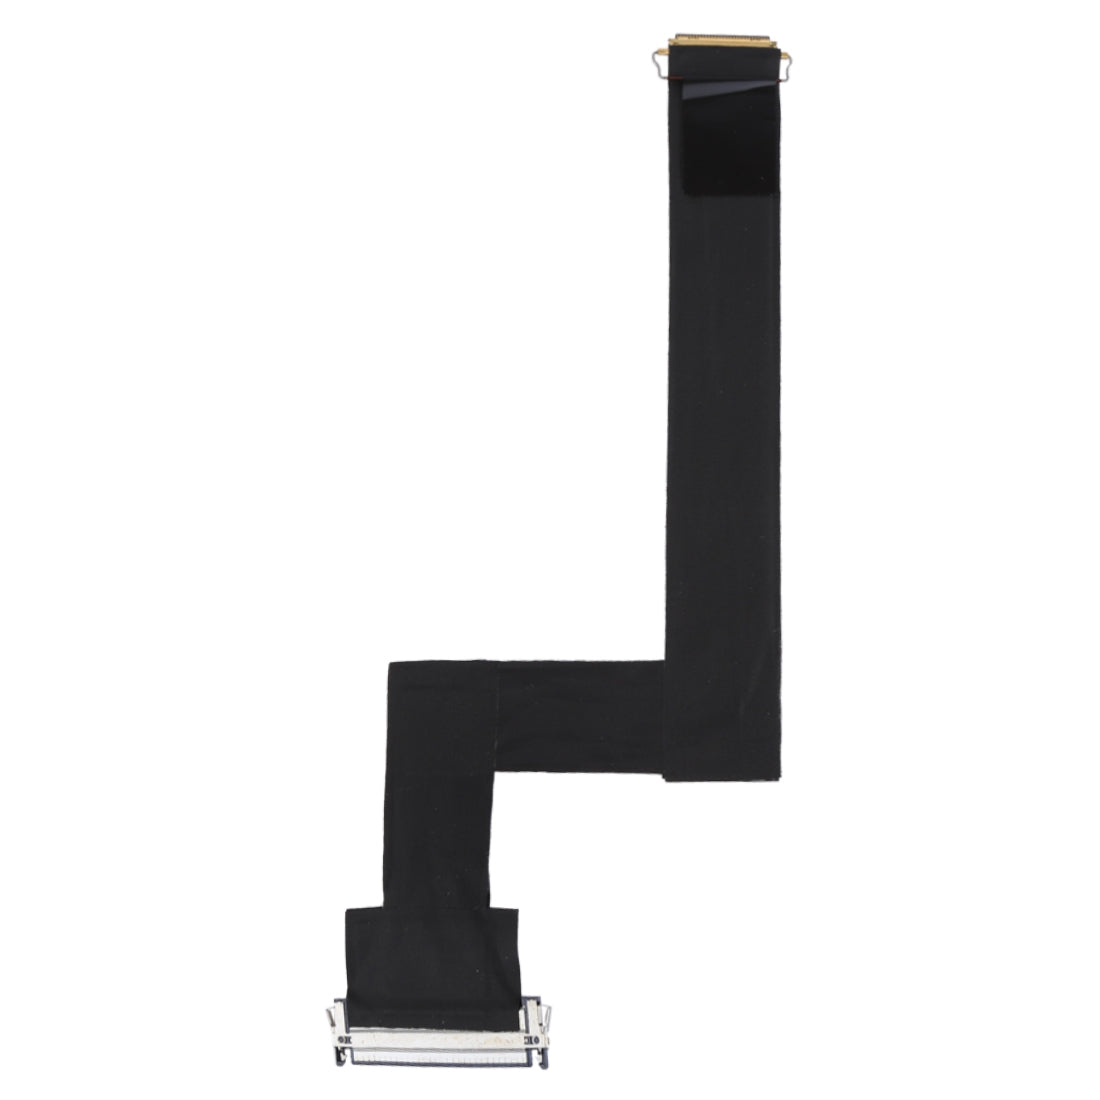 LCD Connector Flex Cable Apple iMac 21.5 A1311 2010